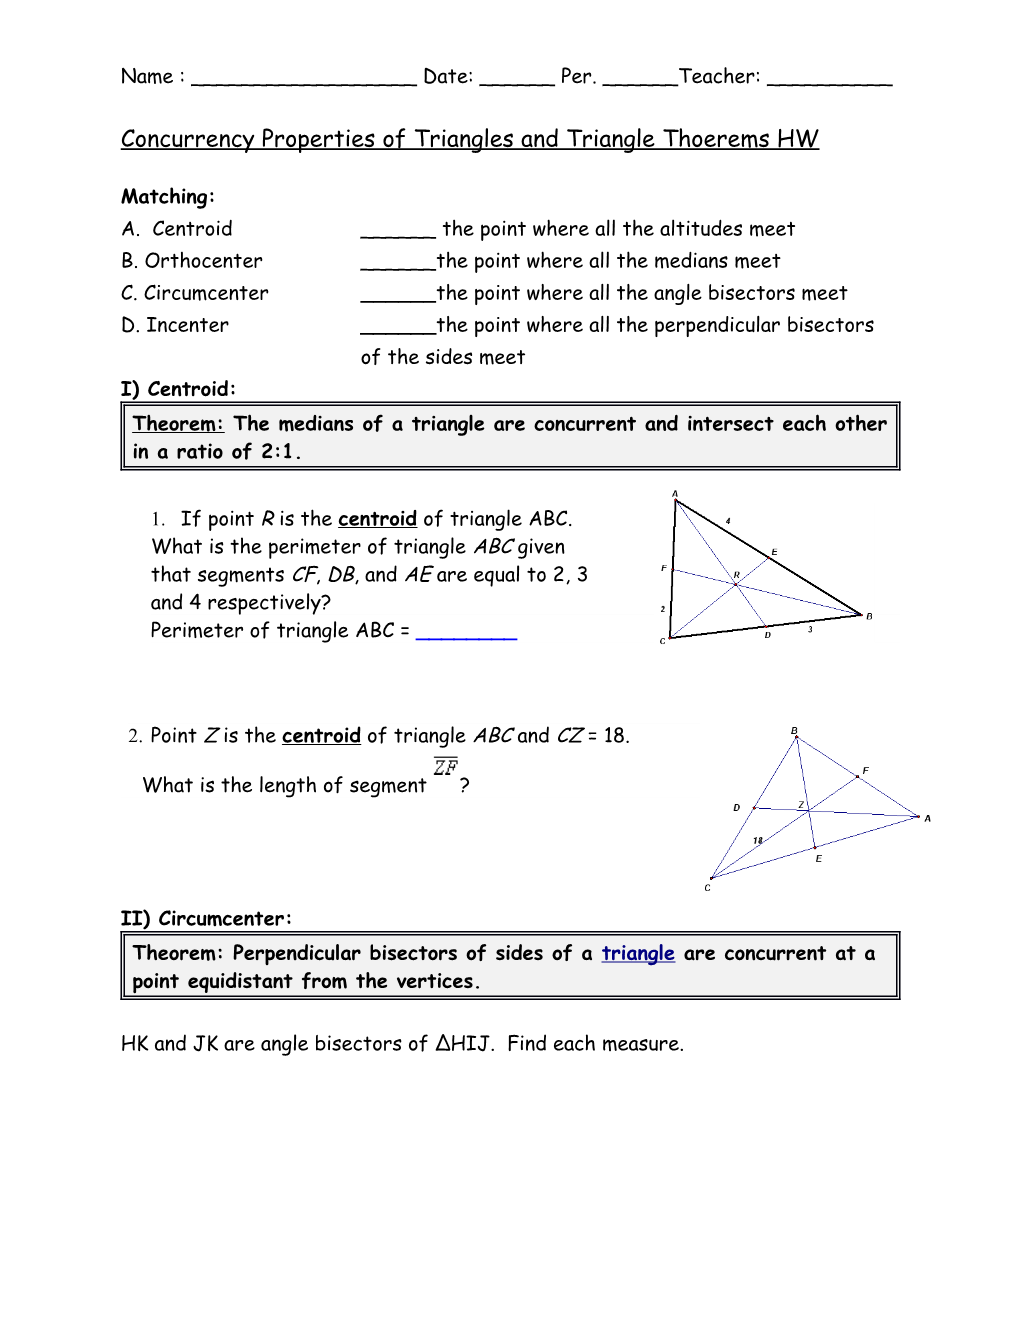 Concurrency Properties of Triangles and Triangle Thoerems HW